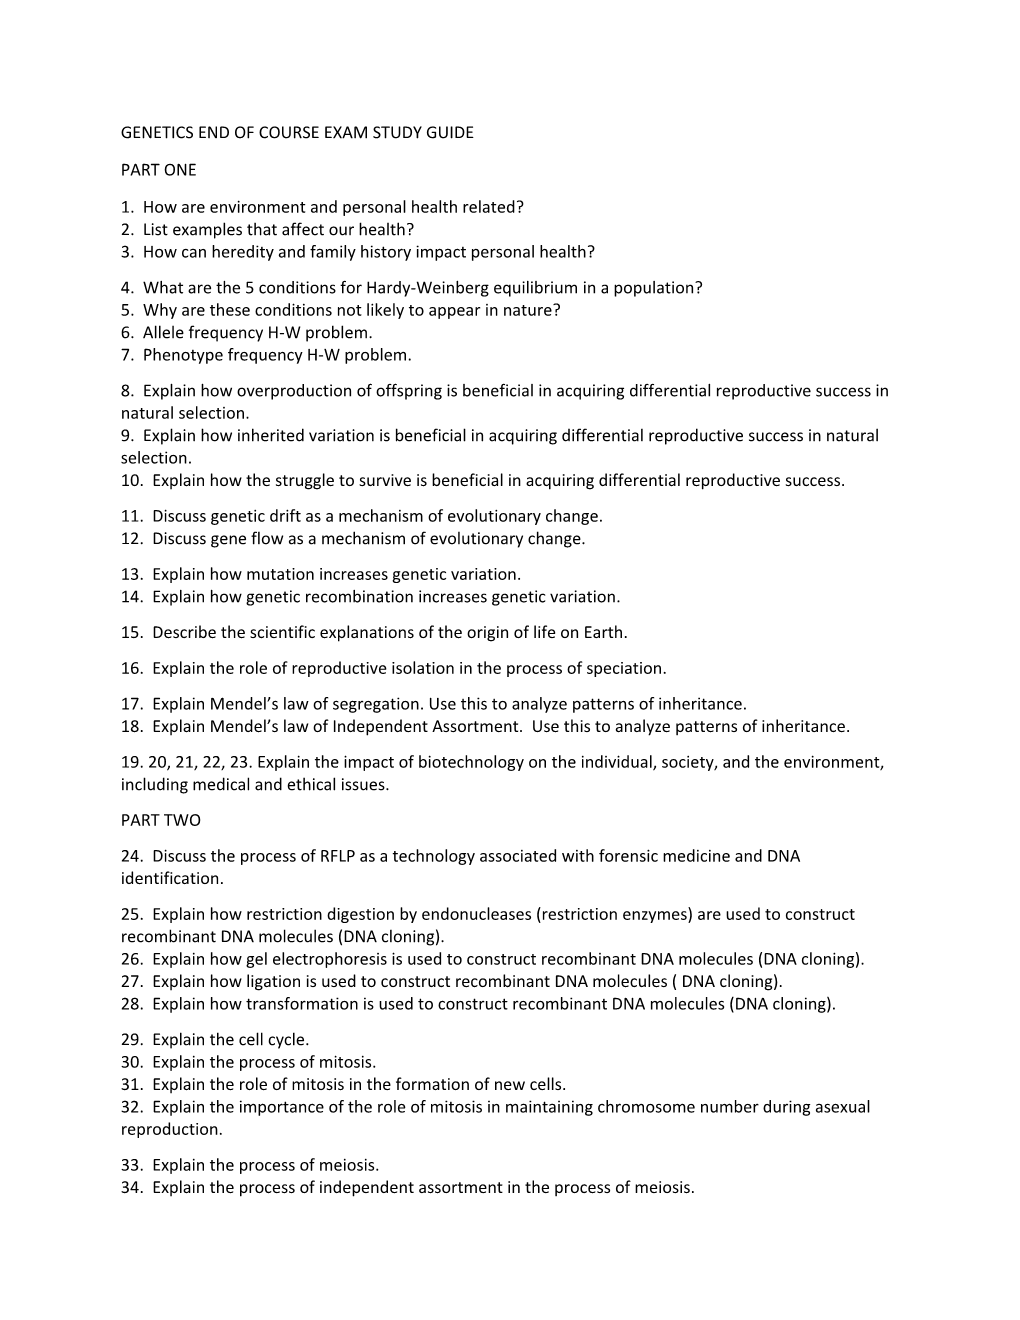 Genetics End of Course Exam Study Guide